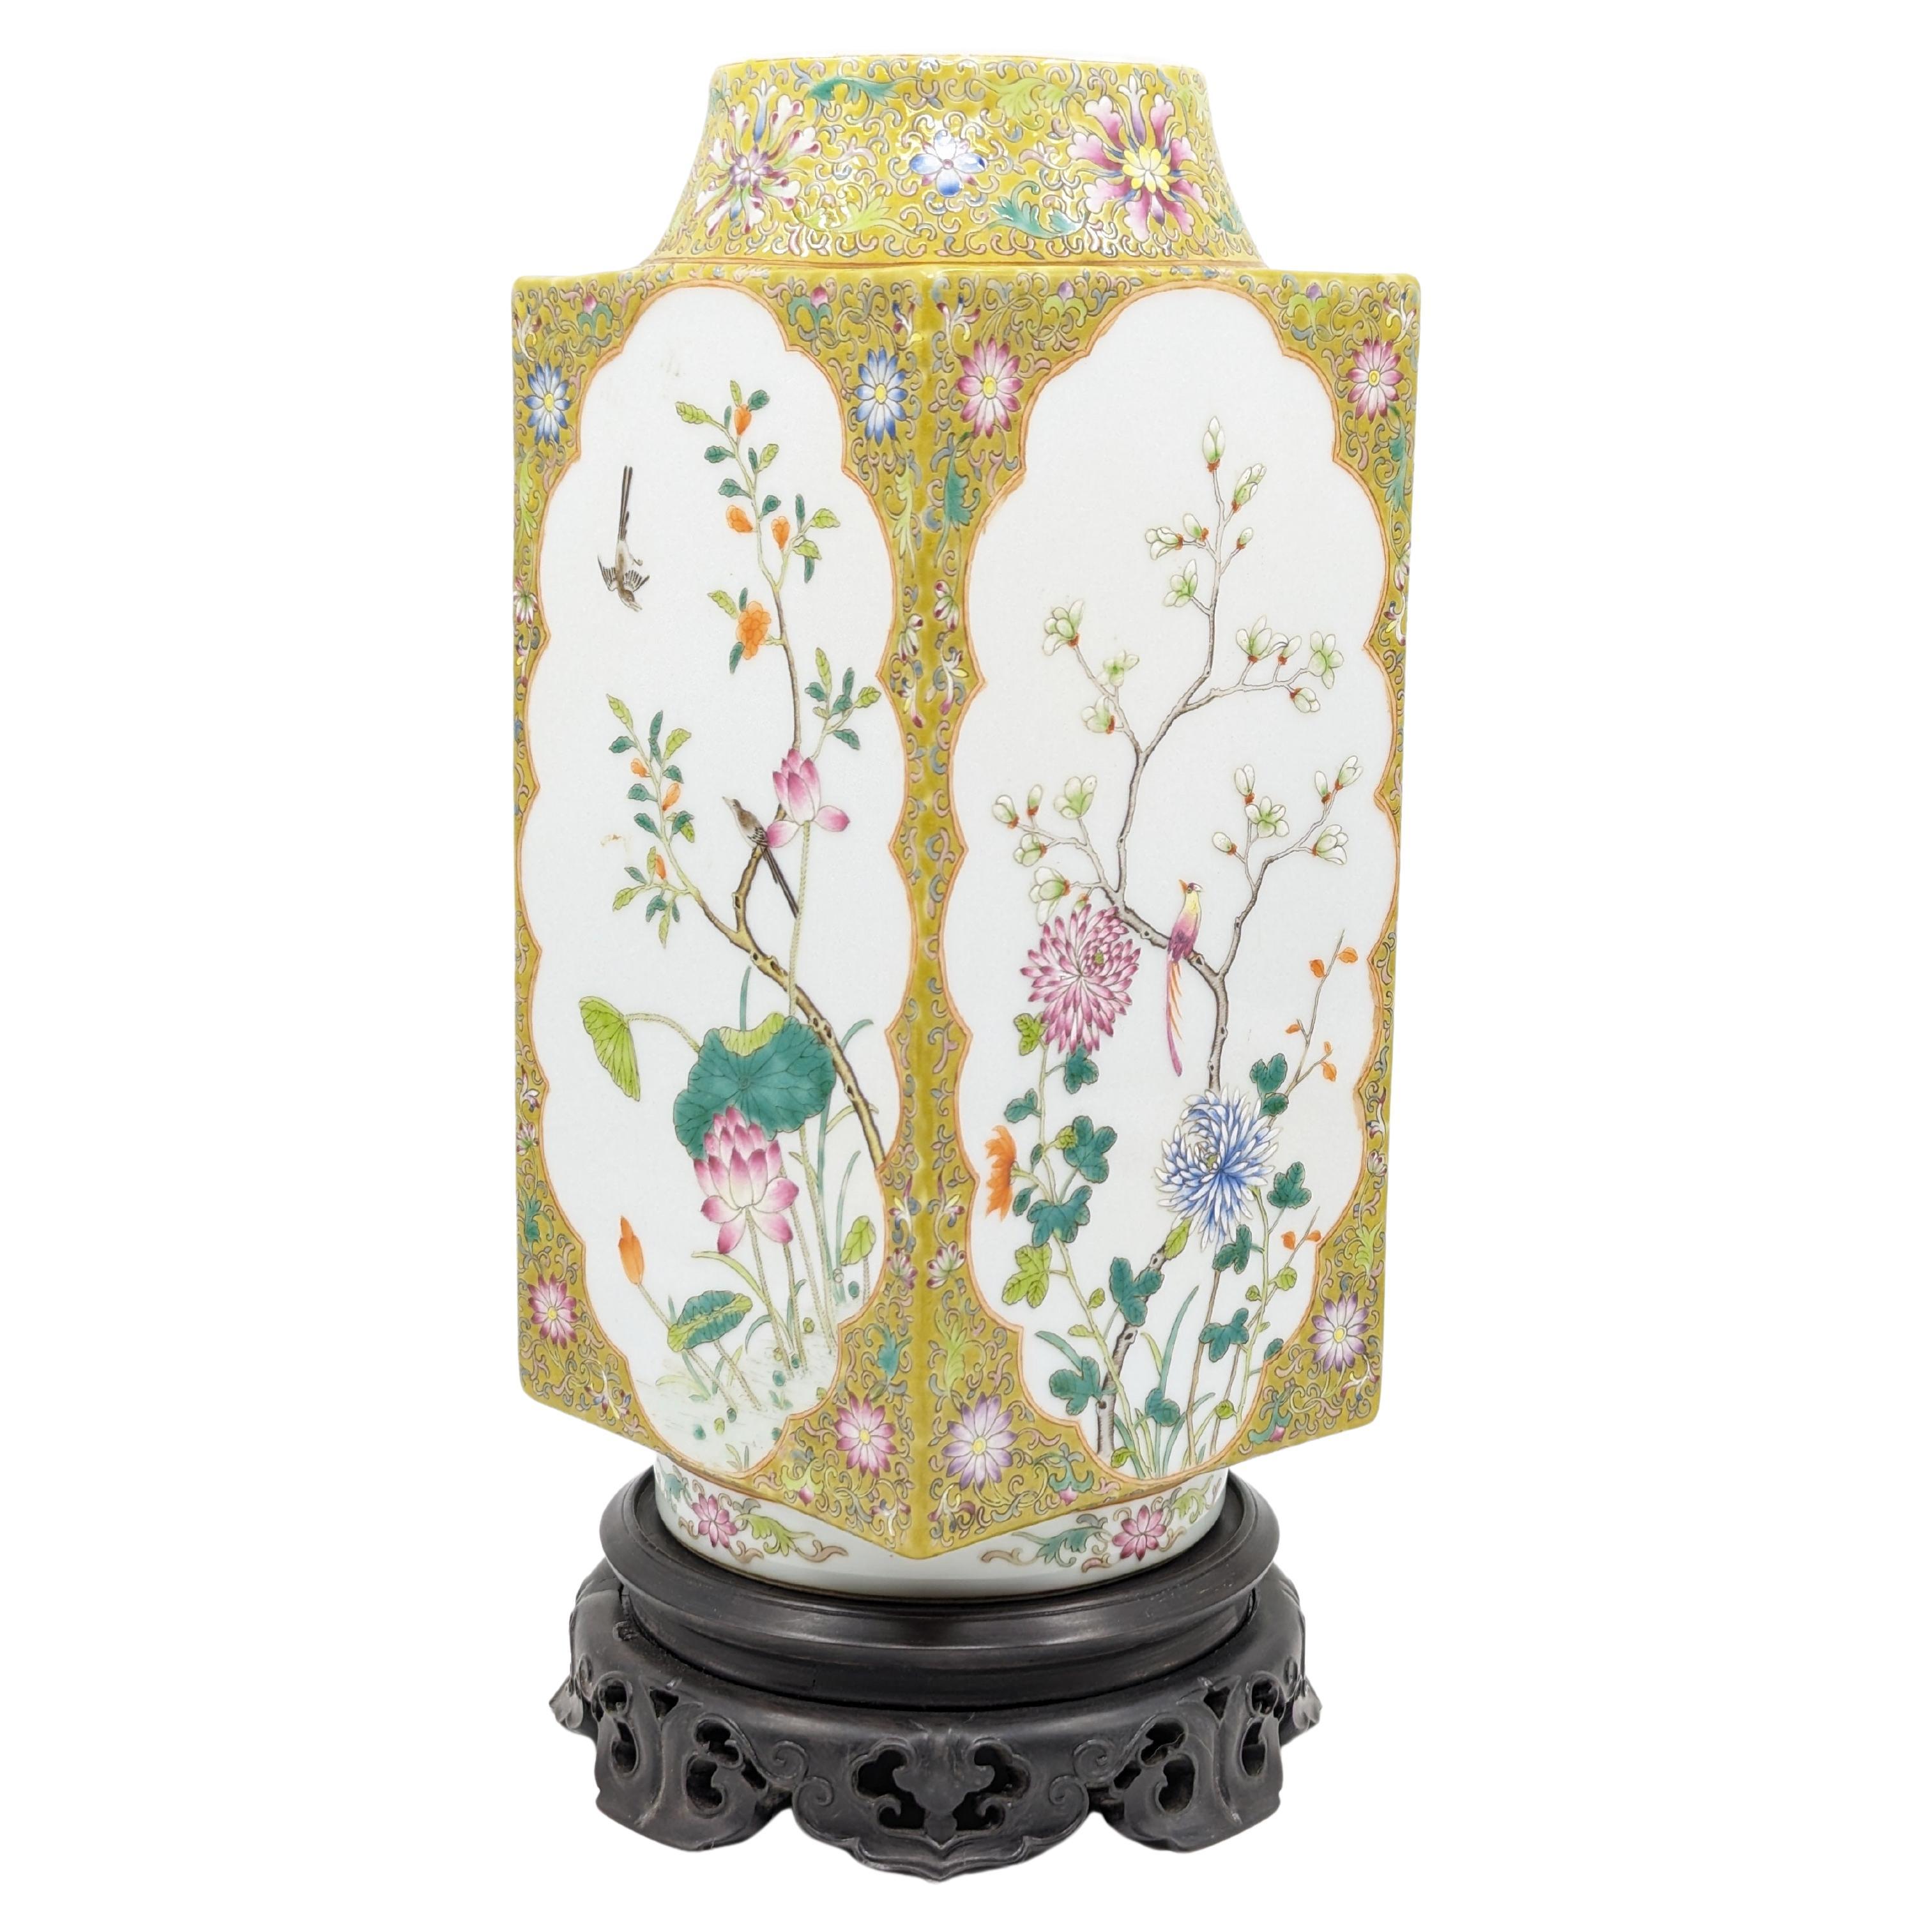 Discover the rich artistry and heritage encapsulated in this early 20th century Republic period Famille Jaune vase, a splendid representation of Chinese craftsmanship during a vibrant chapter in China's artistic journey. This exquisite piece shows